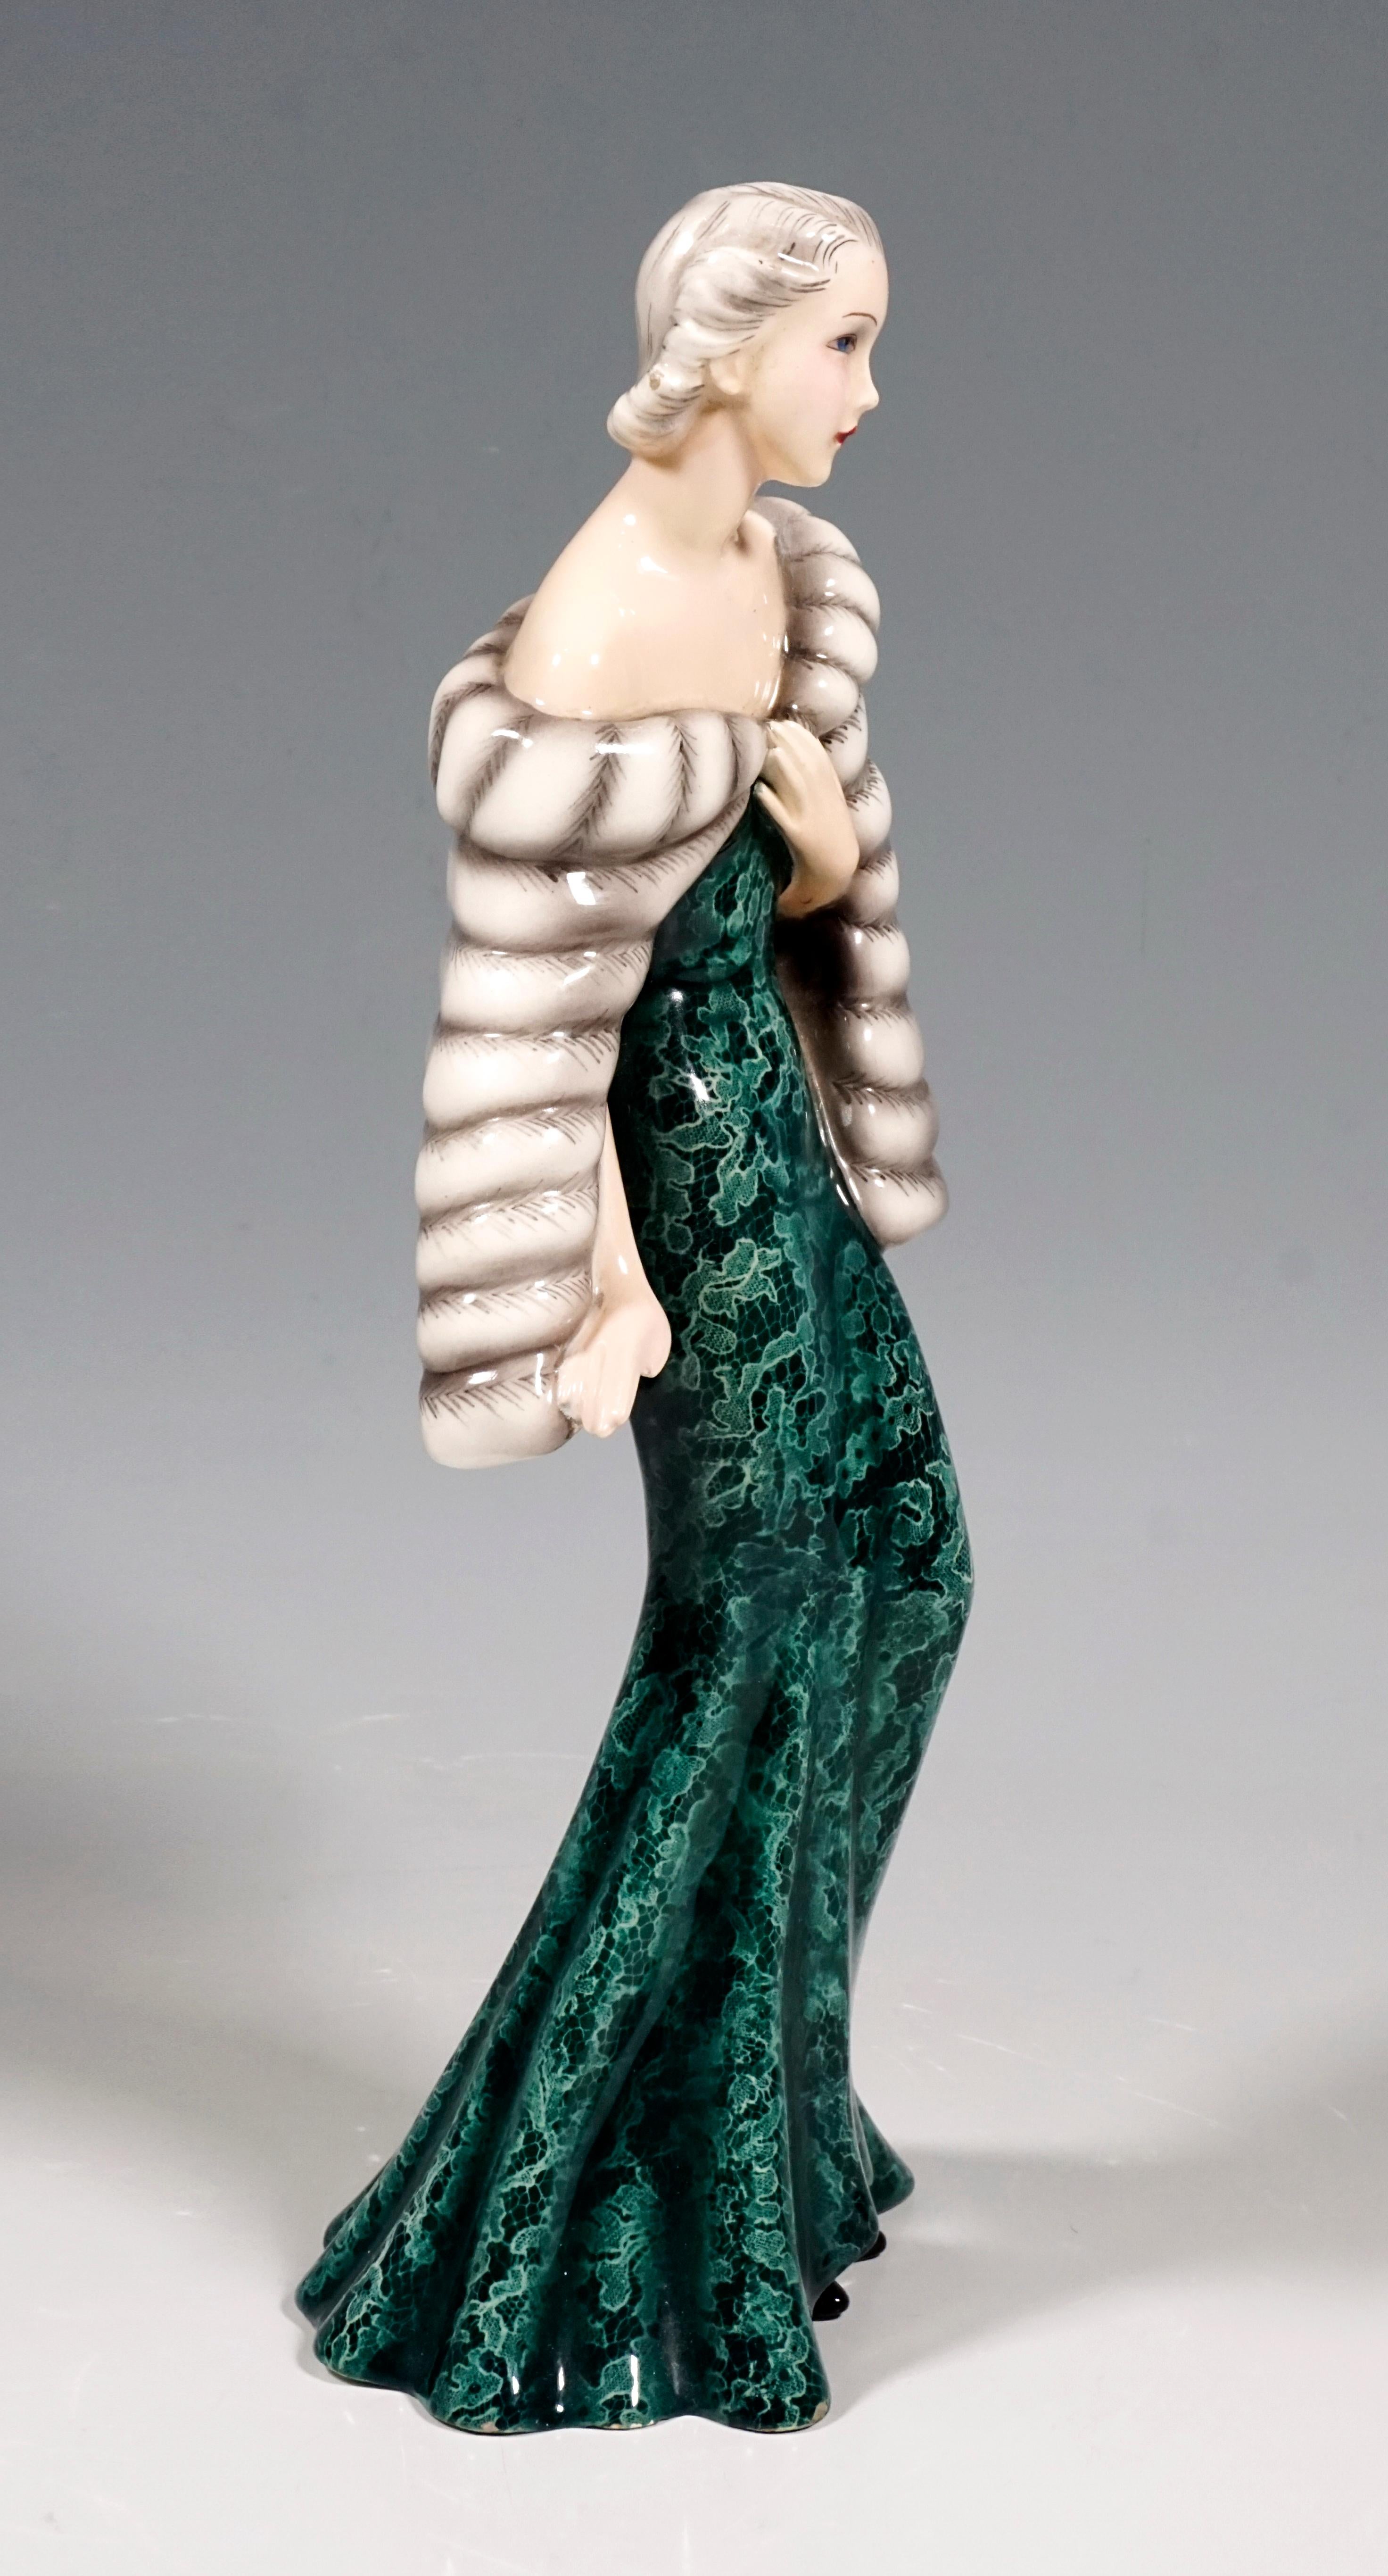 Depiction of an elegant lady in a long, tight-fitting green dress with a white lace pattern and a wide skirt part. Over it she wears a white fur cape, her hair pinned up and matched to the color of the fur, under the robe in front her pointed black